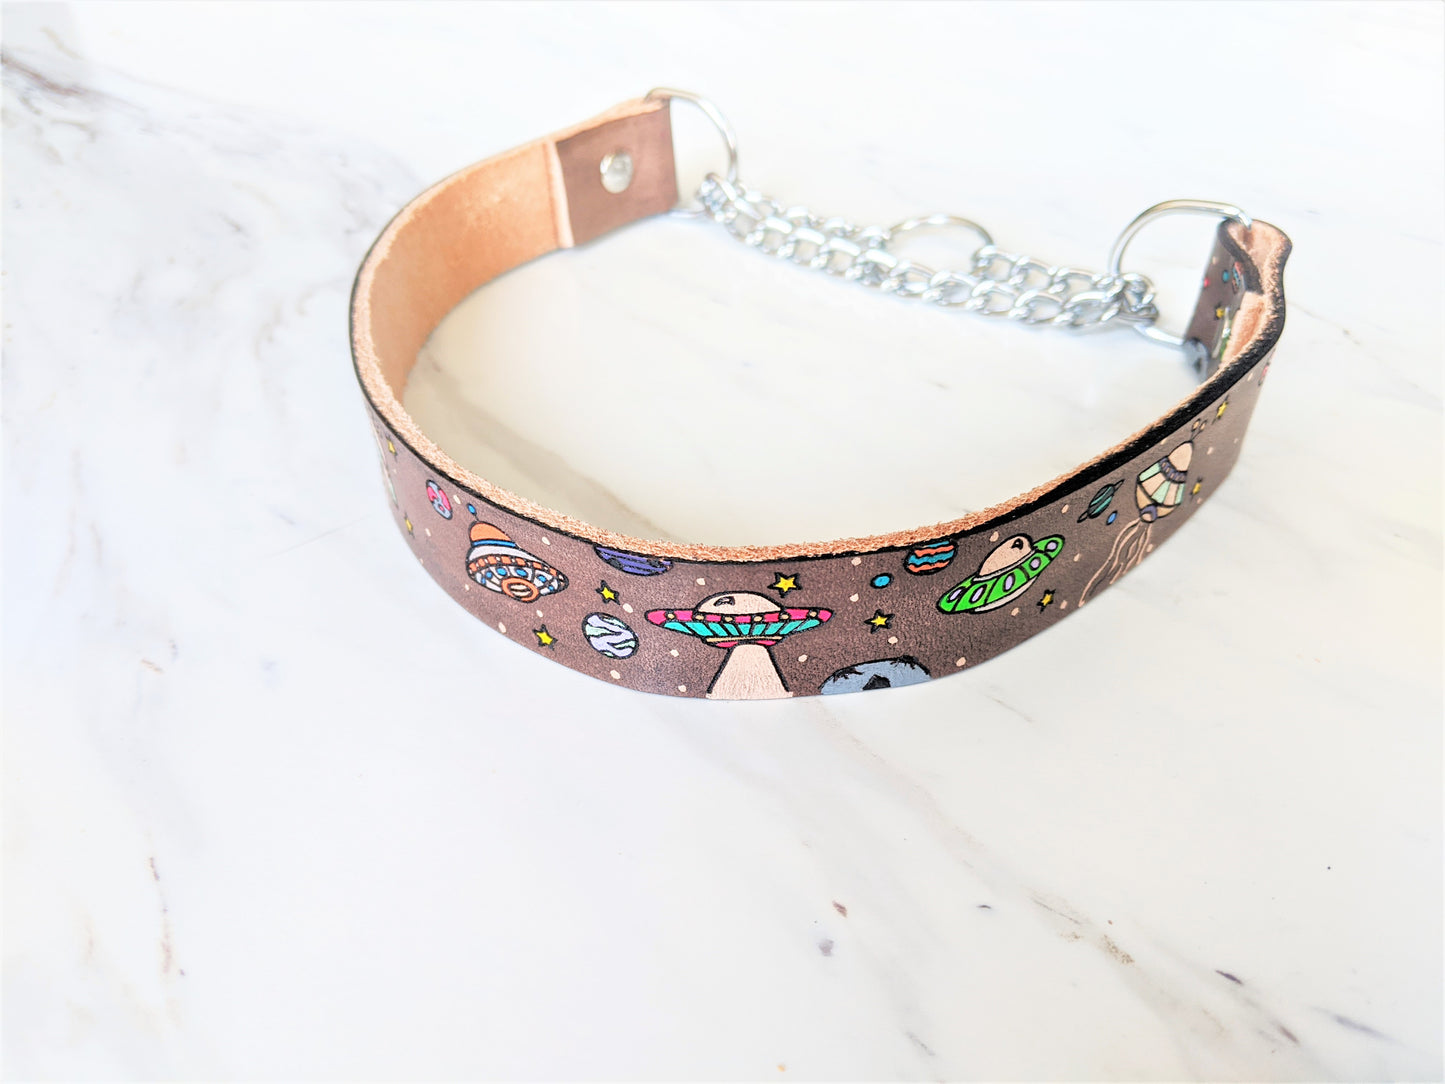 UFO Alien Spaceships - Leather Martingale Dog Collar